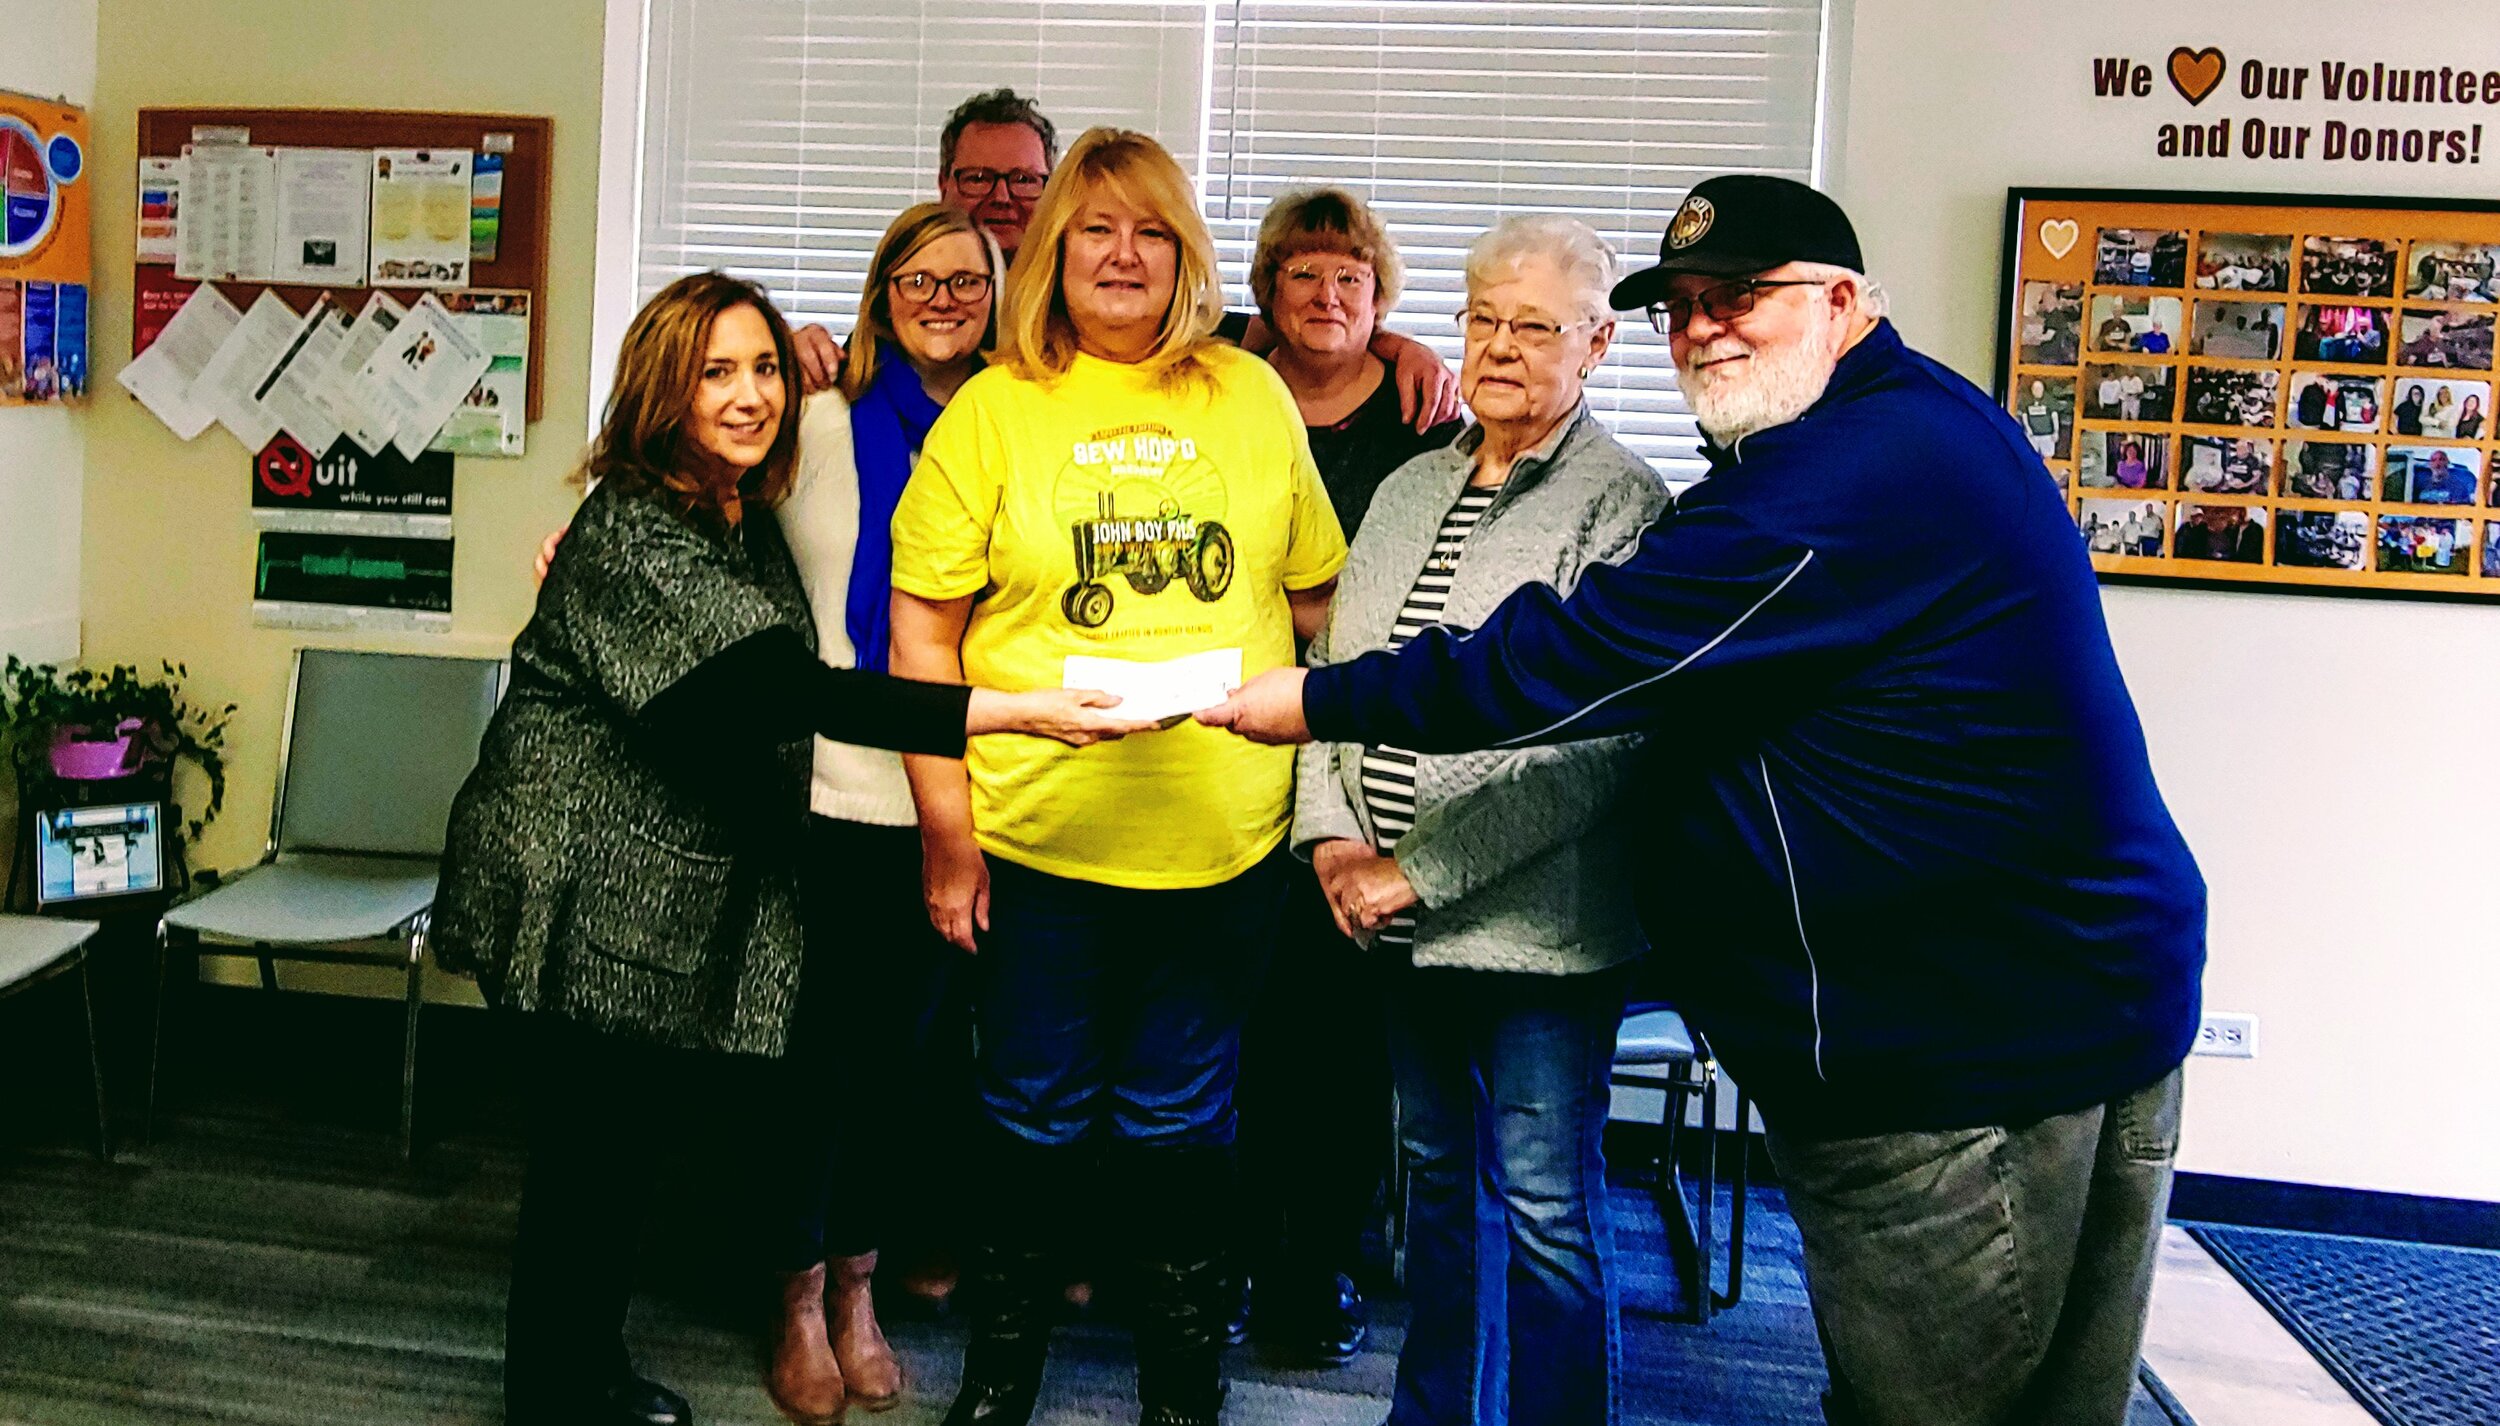  The Hoffman Family and Lance Lamb of Sew Hop'd in Huntley present donations of over $1200 from the launch of John Boy Beer in memory of local resident John Hoffman.  A portion of the proceeds from sales of the beer and the t-shirts will be donated t